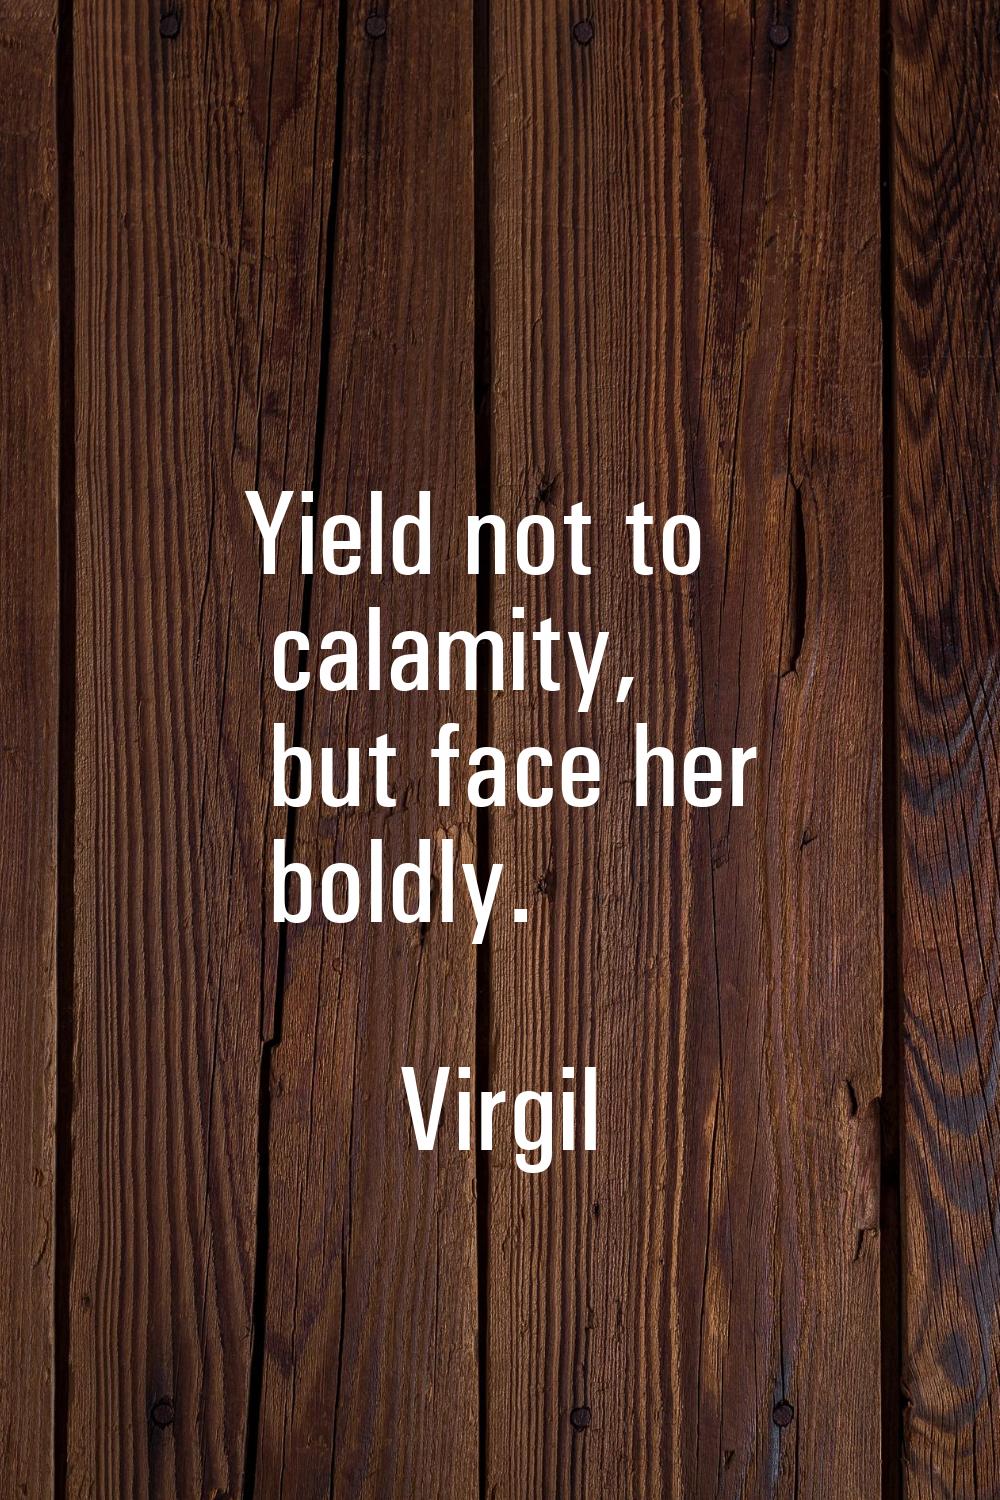 Yield not to calamity, but face her boldly.